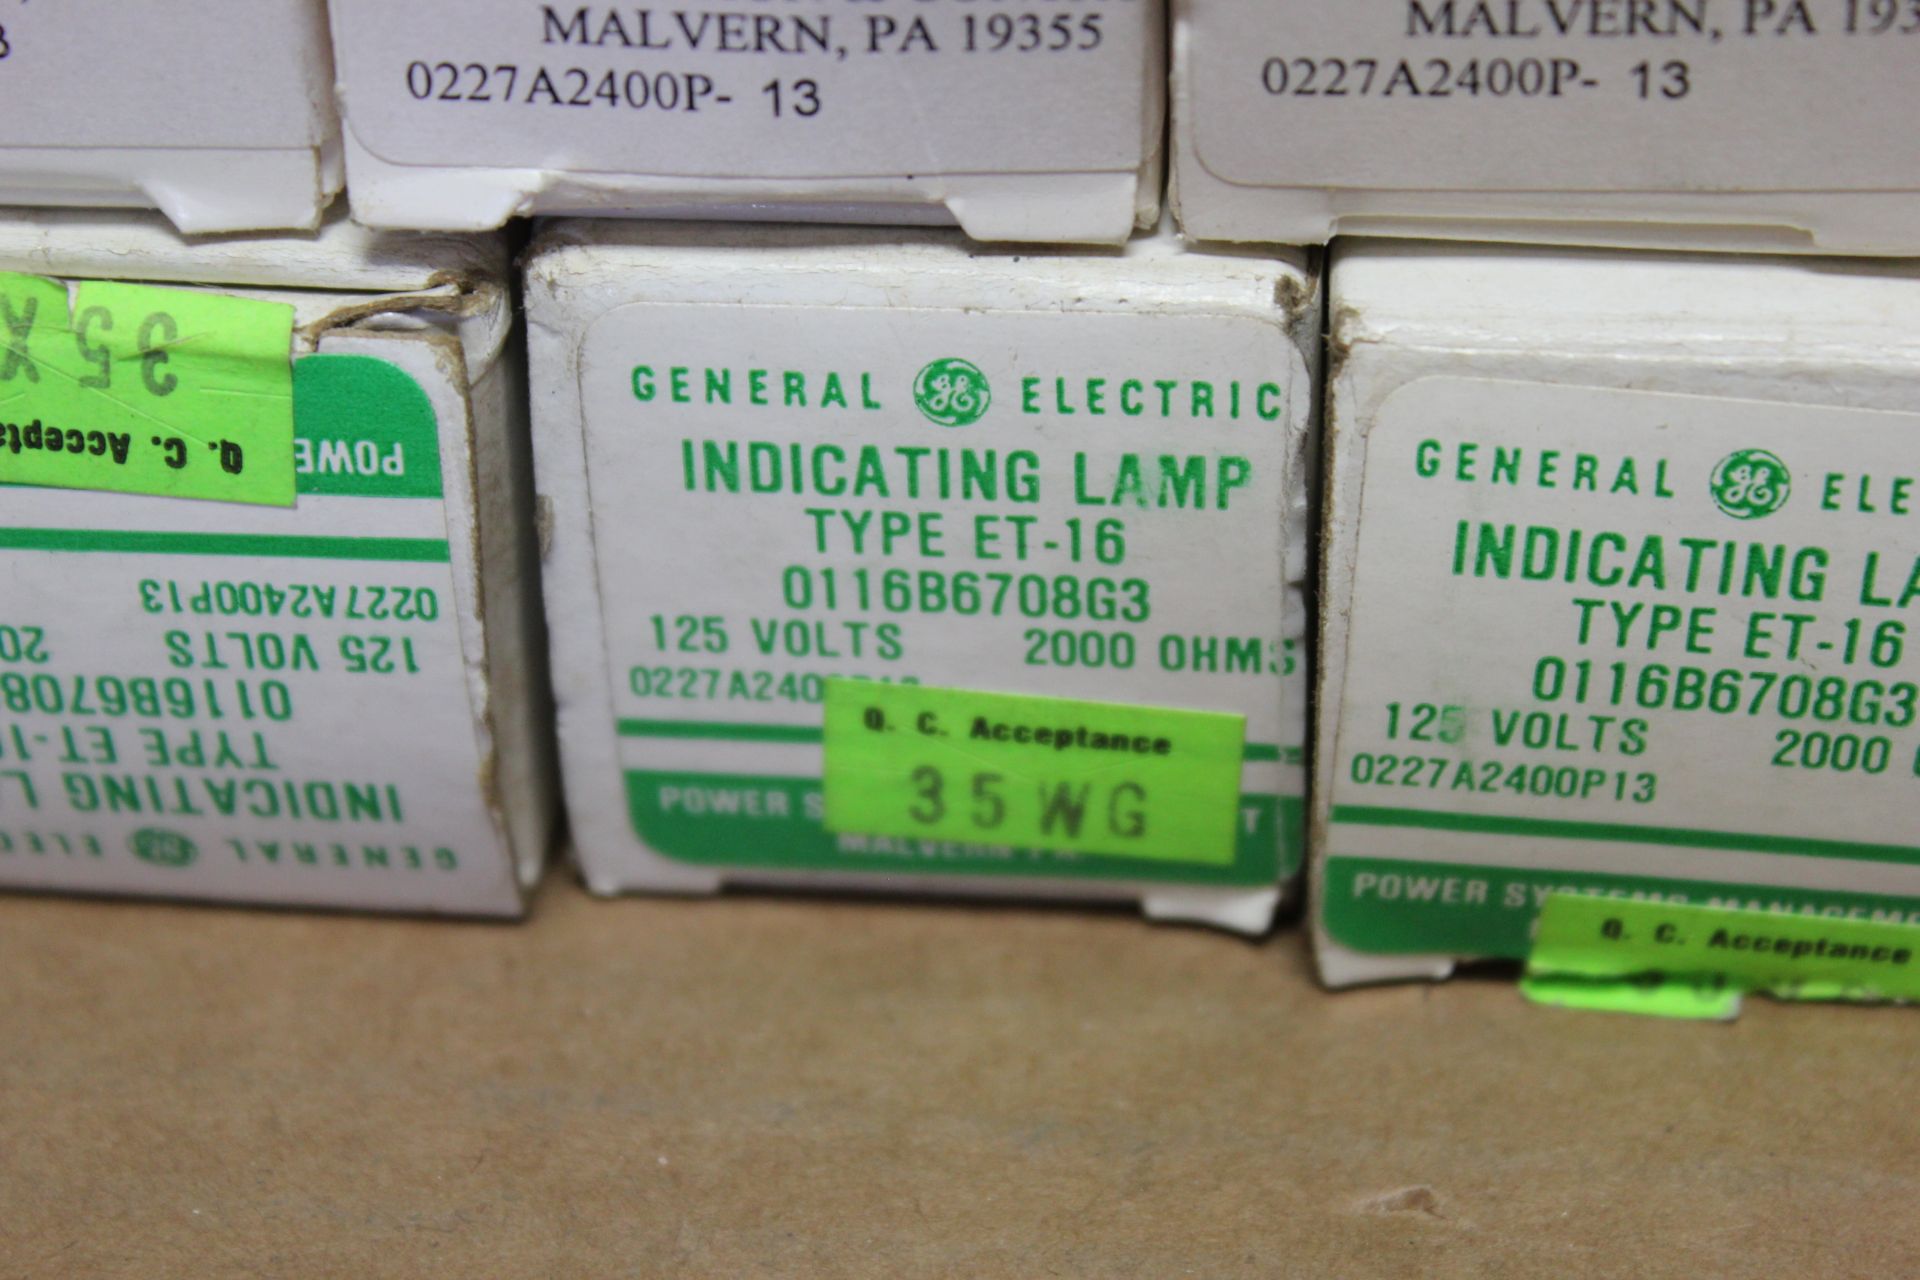 LOT OF 12 NEW GENERAL ELECTRIC INDICATING LAMPS - Image 3 of 4